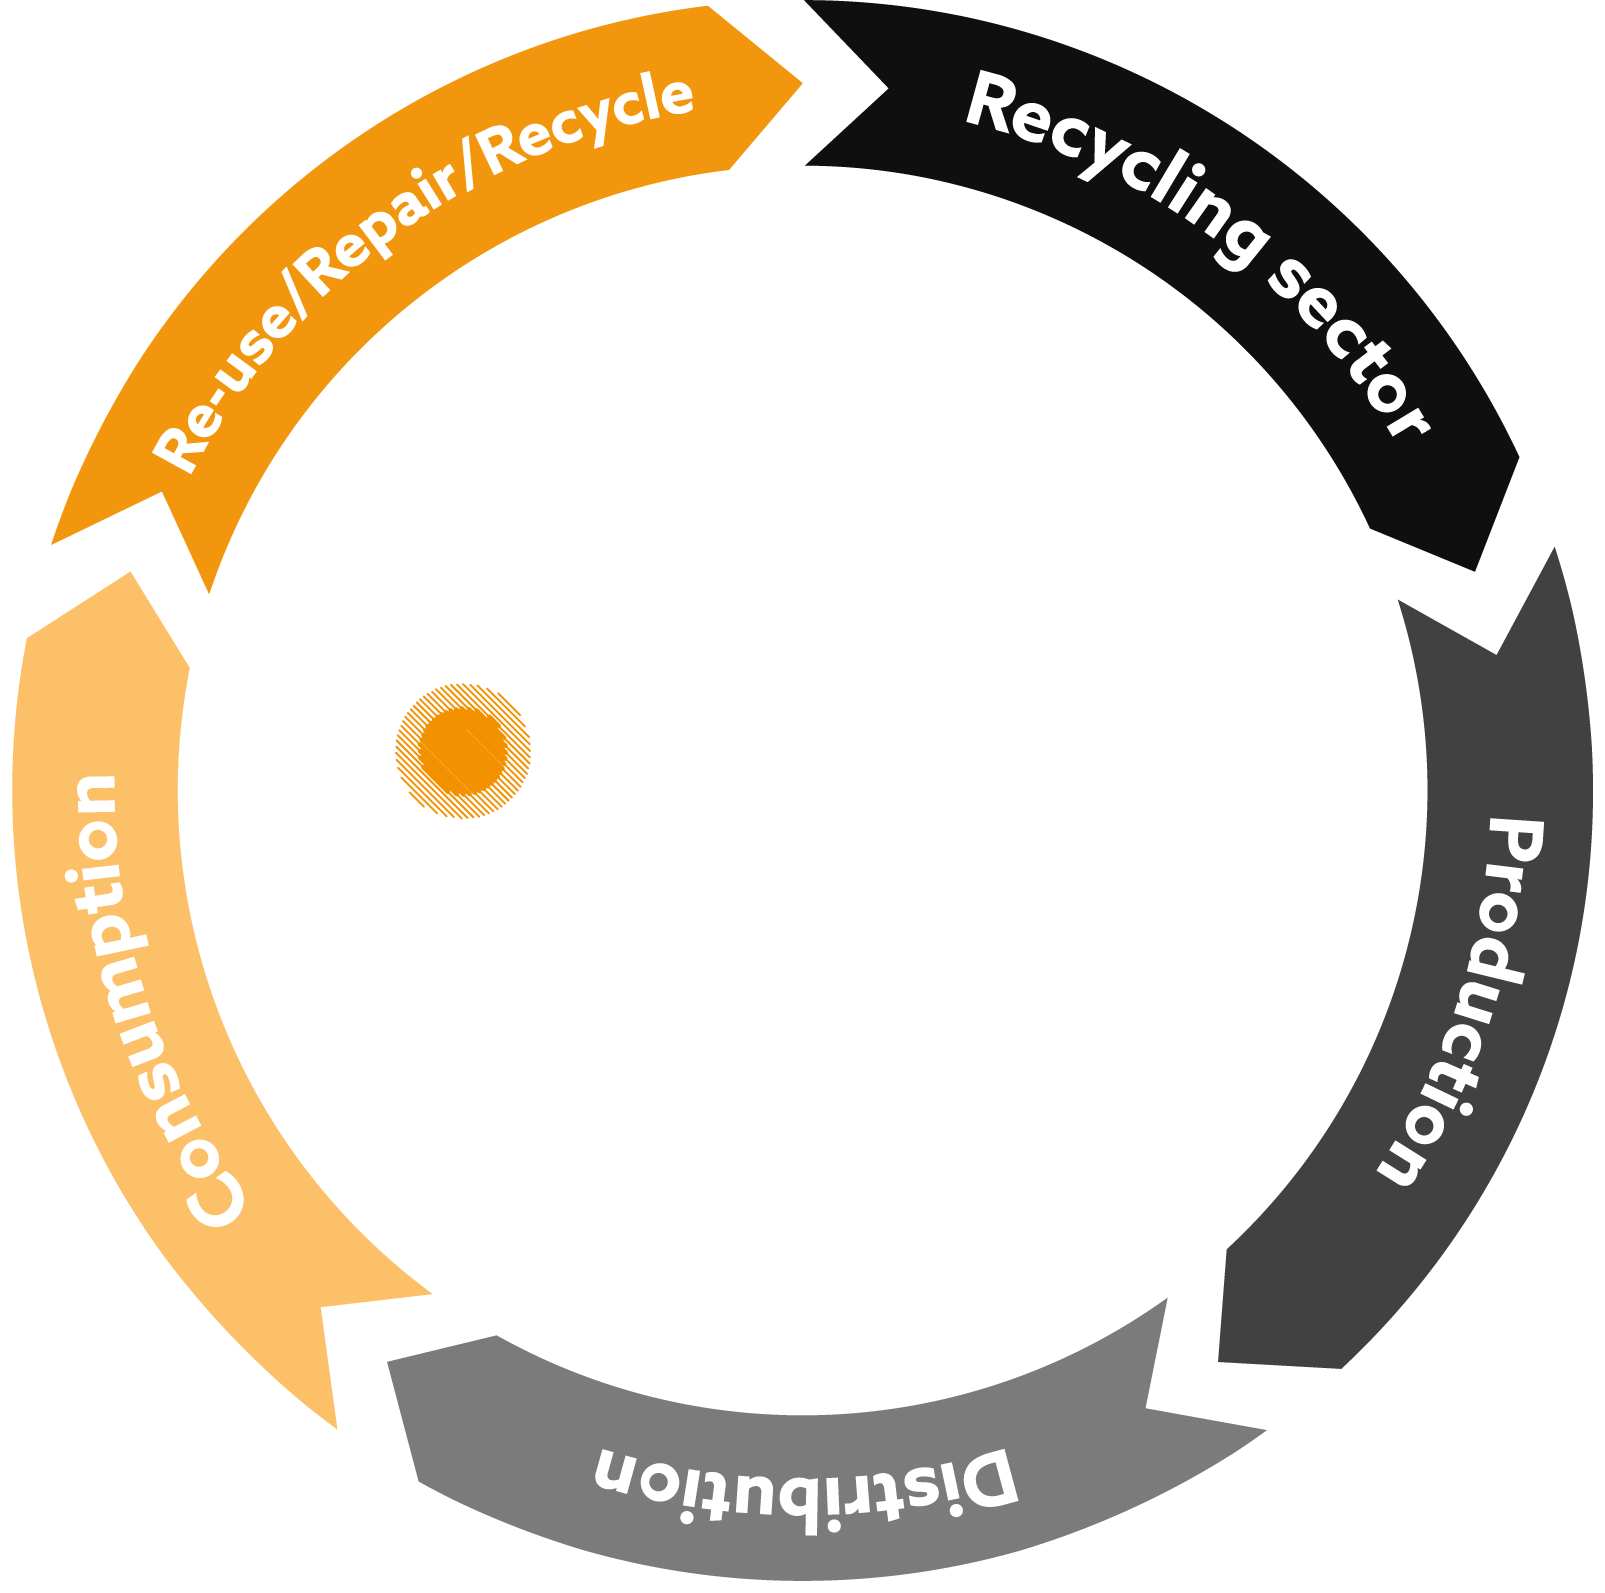 Portland Traffic’s circular economy showing re-use, repair, recycle to recycling sector to production to distribution to consumption.